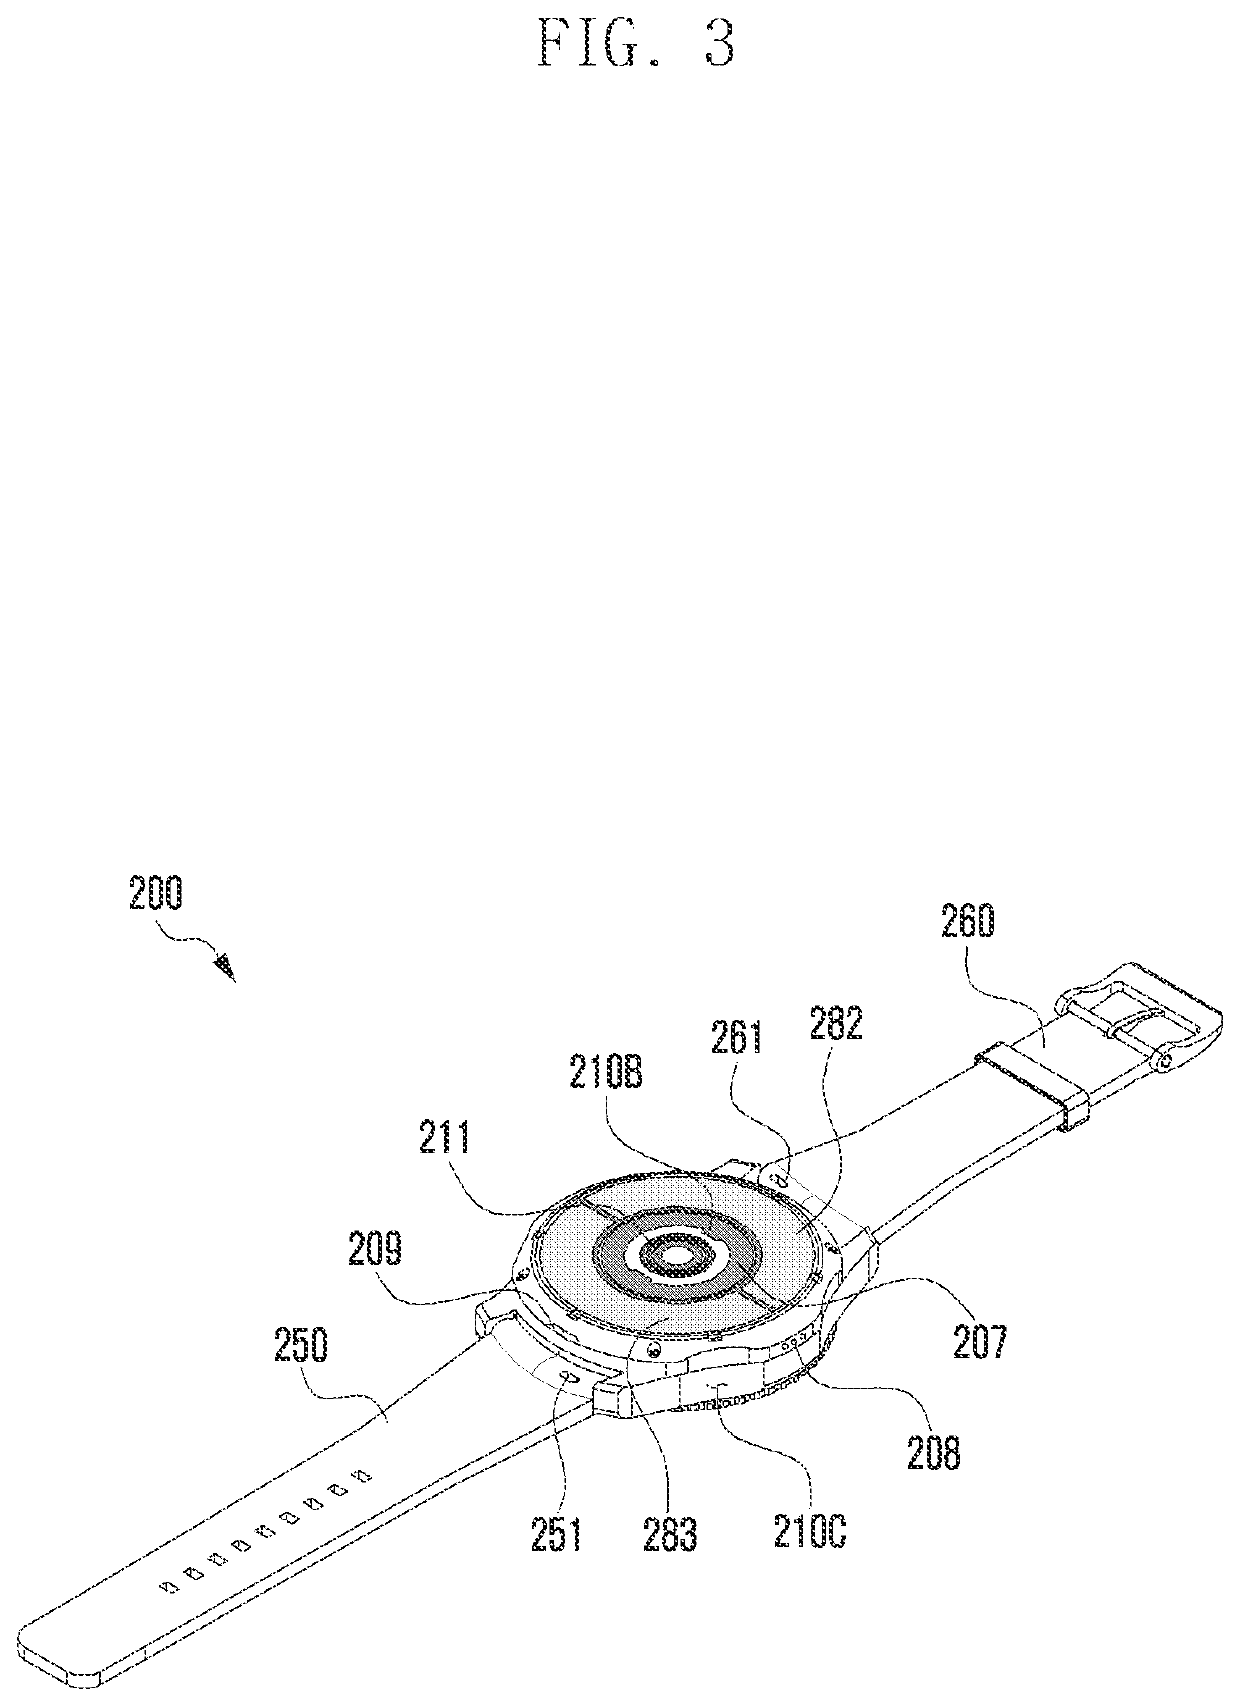 Electronic device and electrode in the same